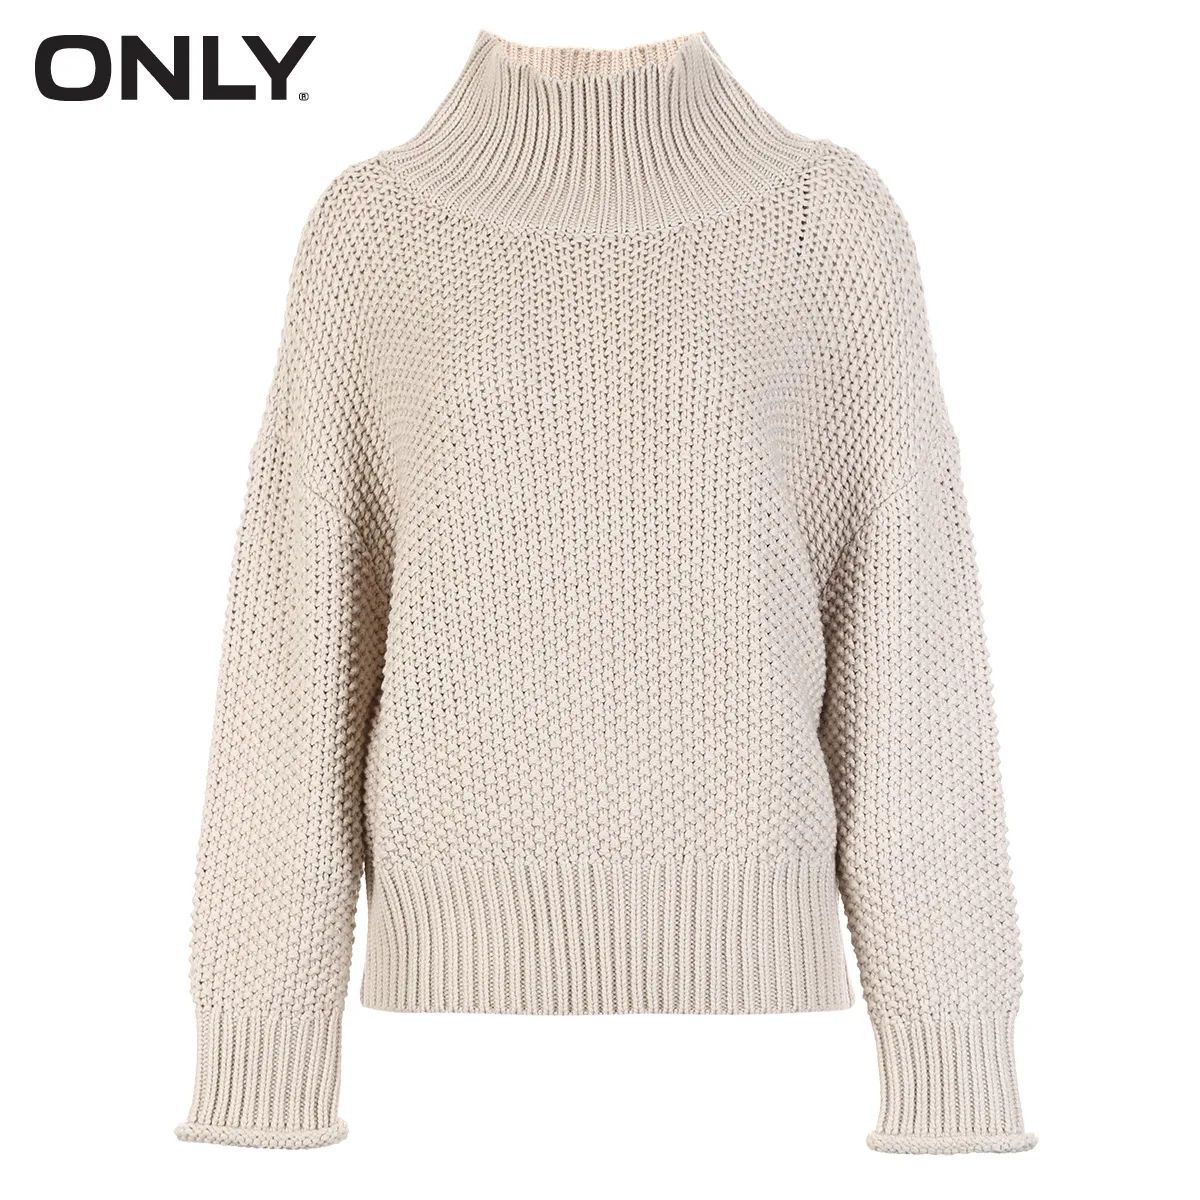 ONLY Women's Loose Fit Pure Color High-necked Pullover Sweater|118313504 | Женская одежда